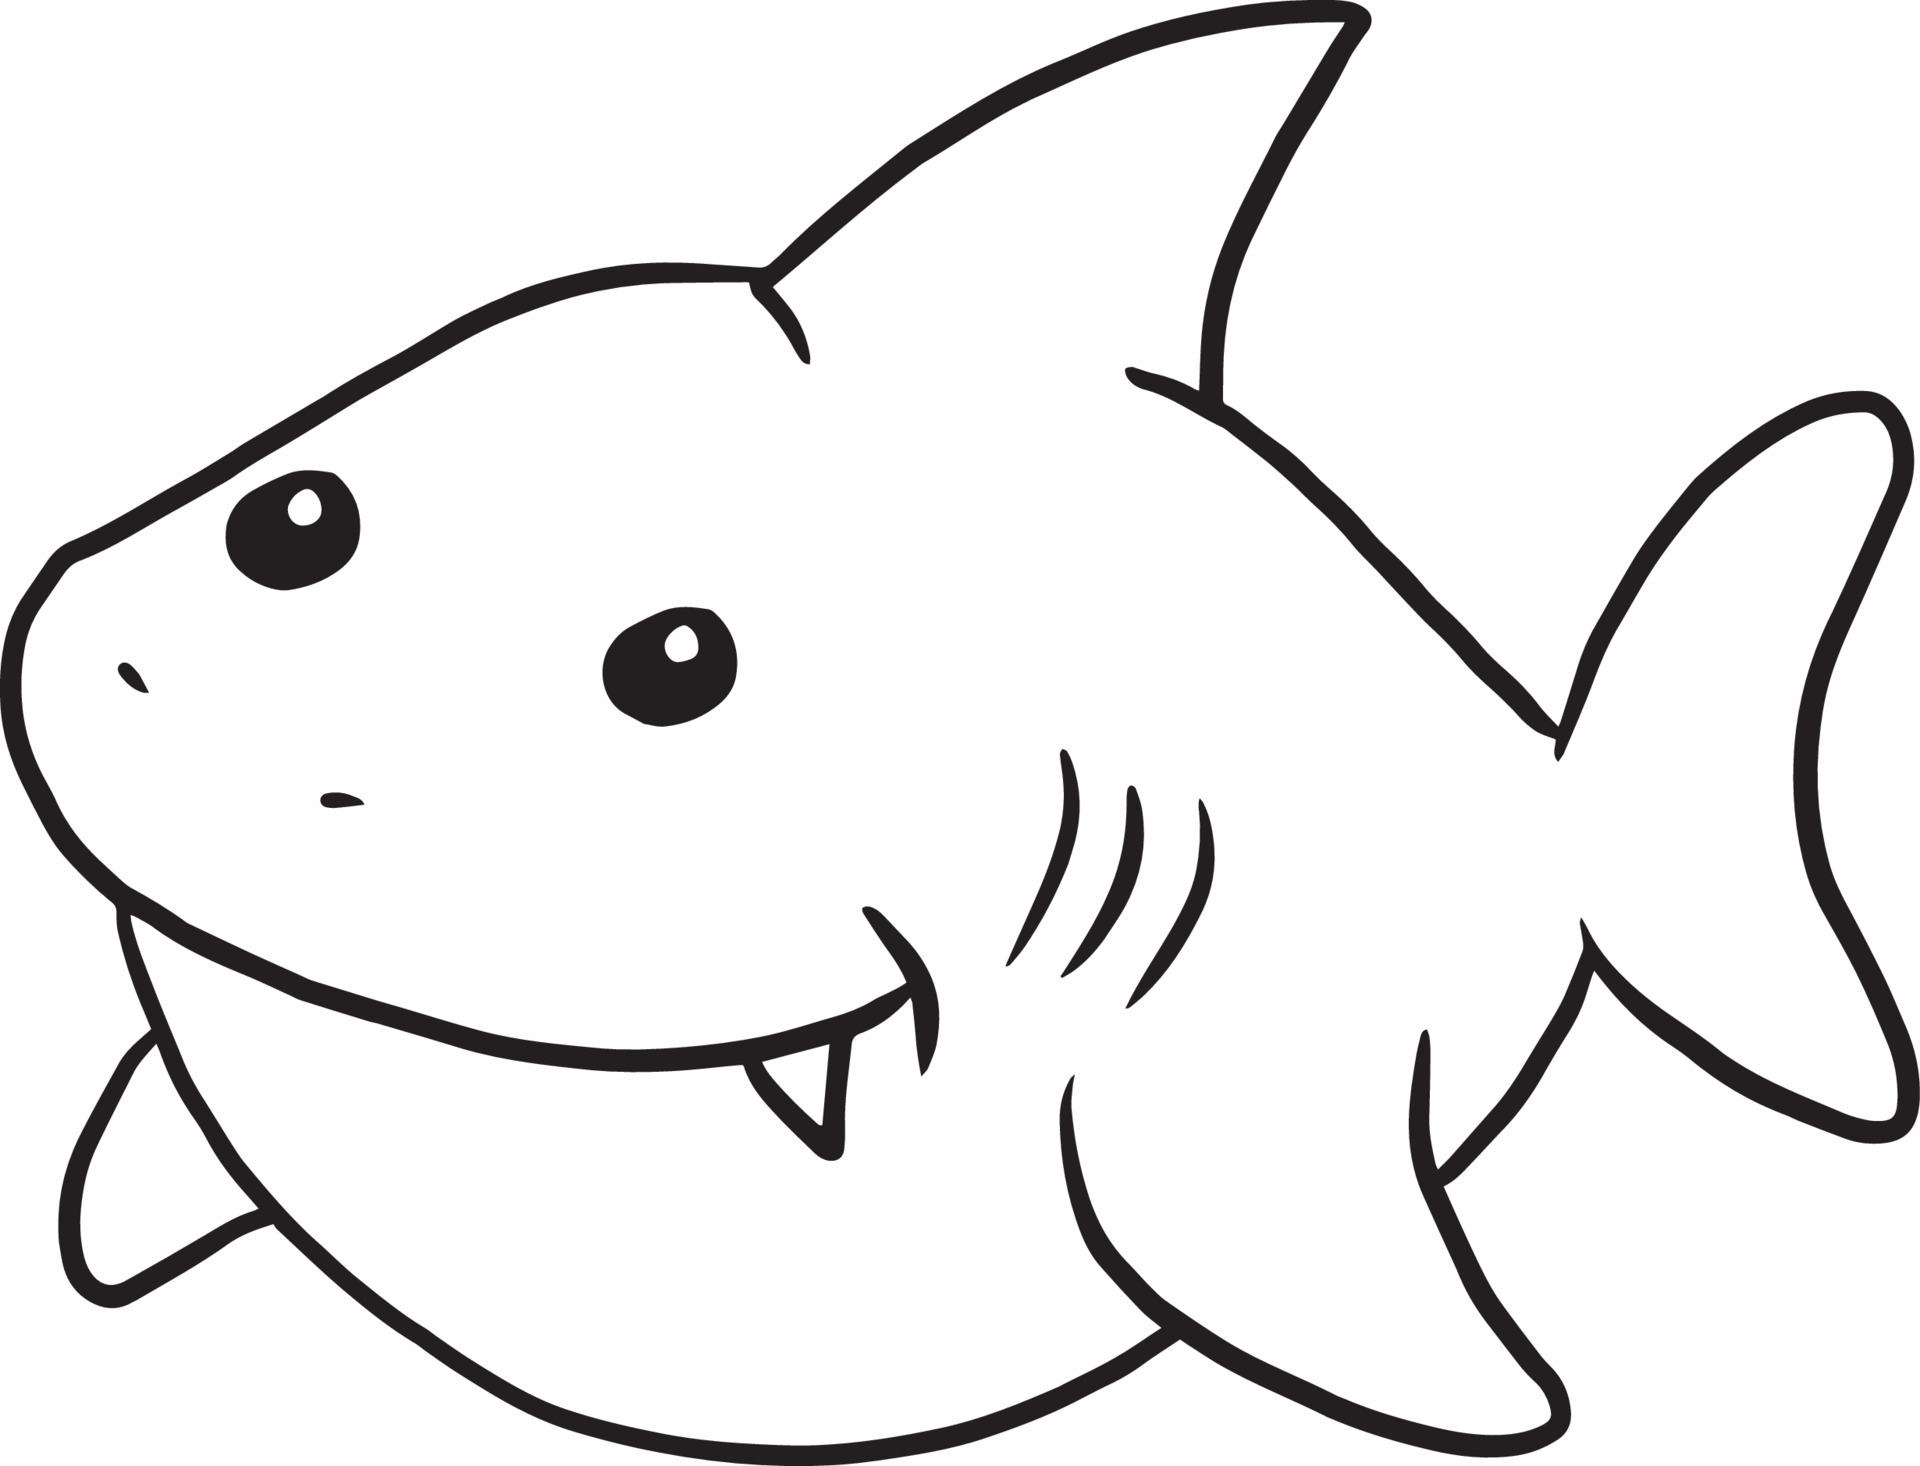 Shortfin Mako Shark Sticker in Cute Anime Style Stock Photo - Image of  features, brings: 275866360